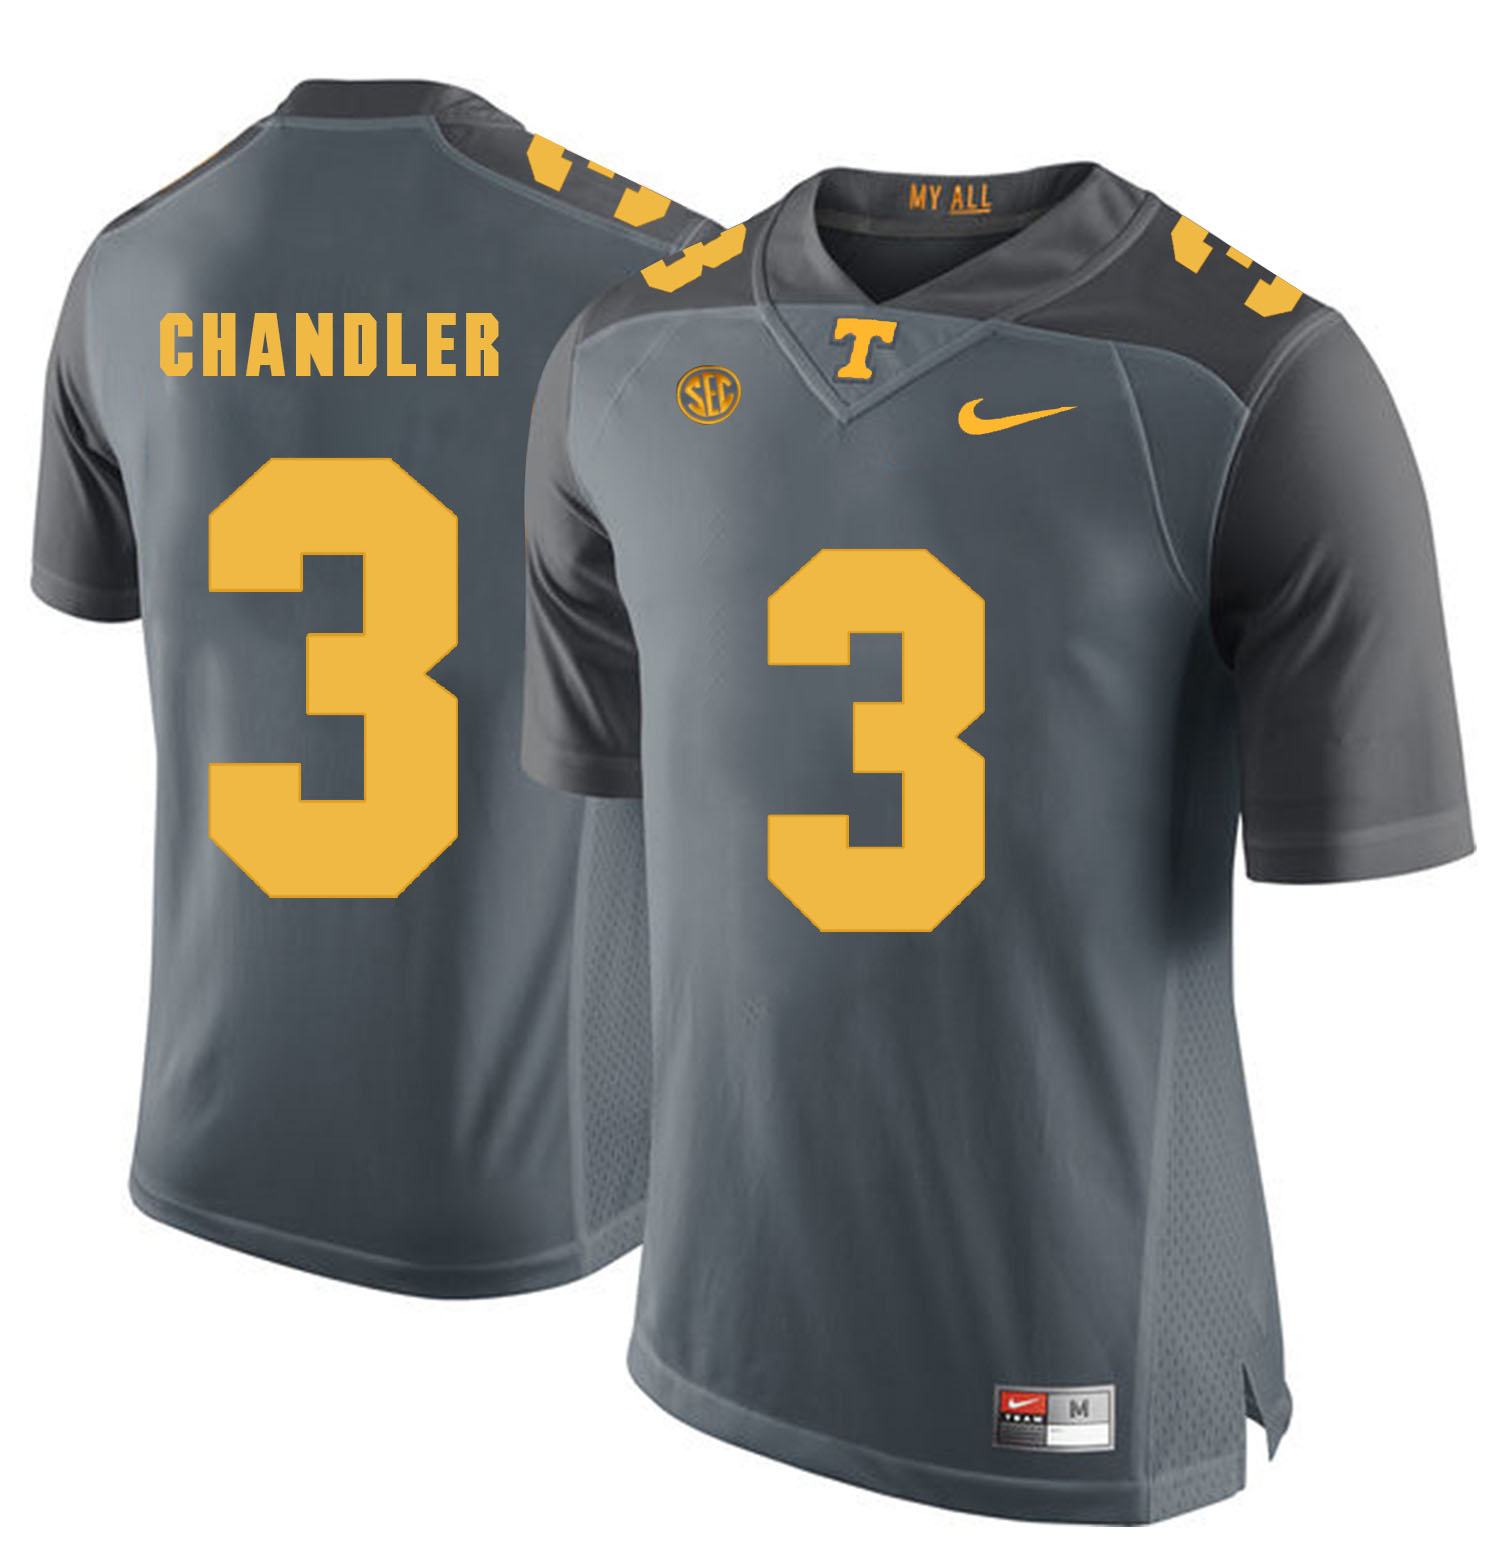 Tennessee Volunteers 3 White Ty Chandler Gray College Football Jersey